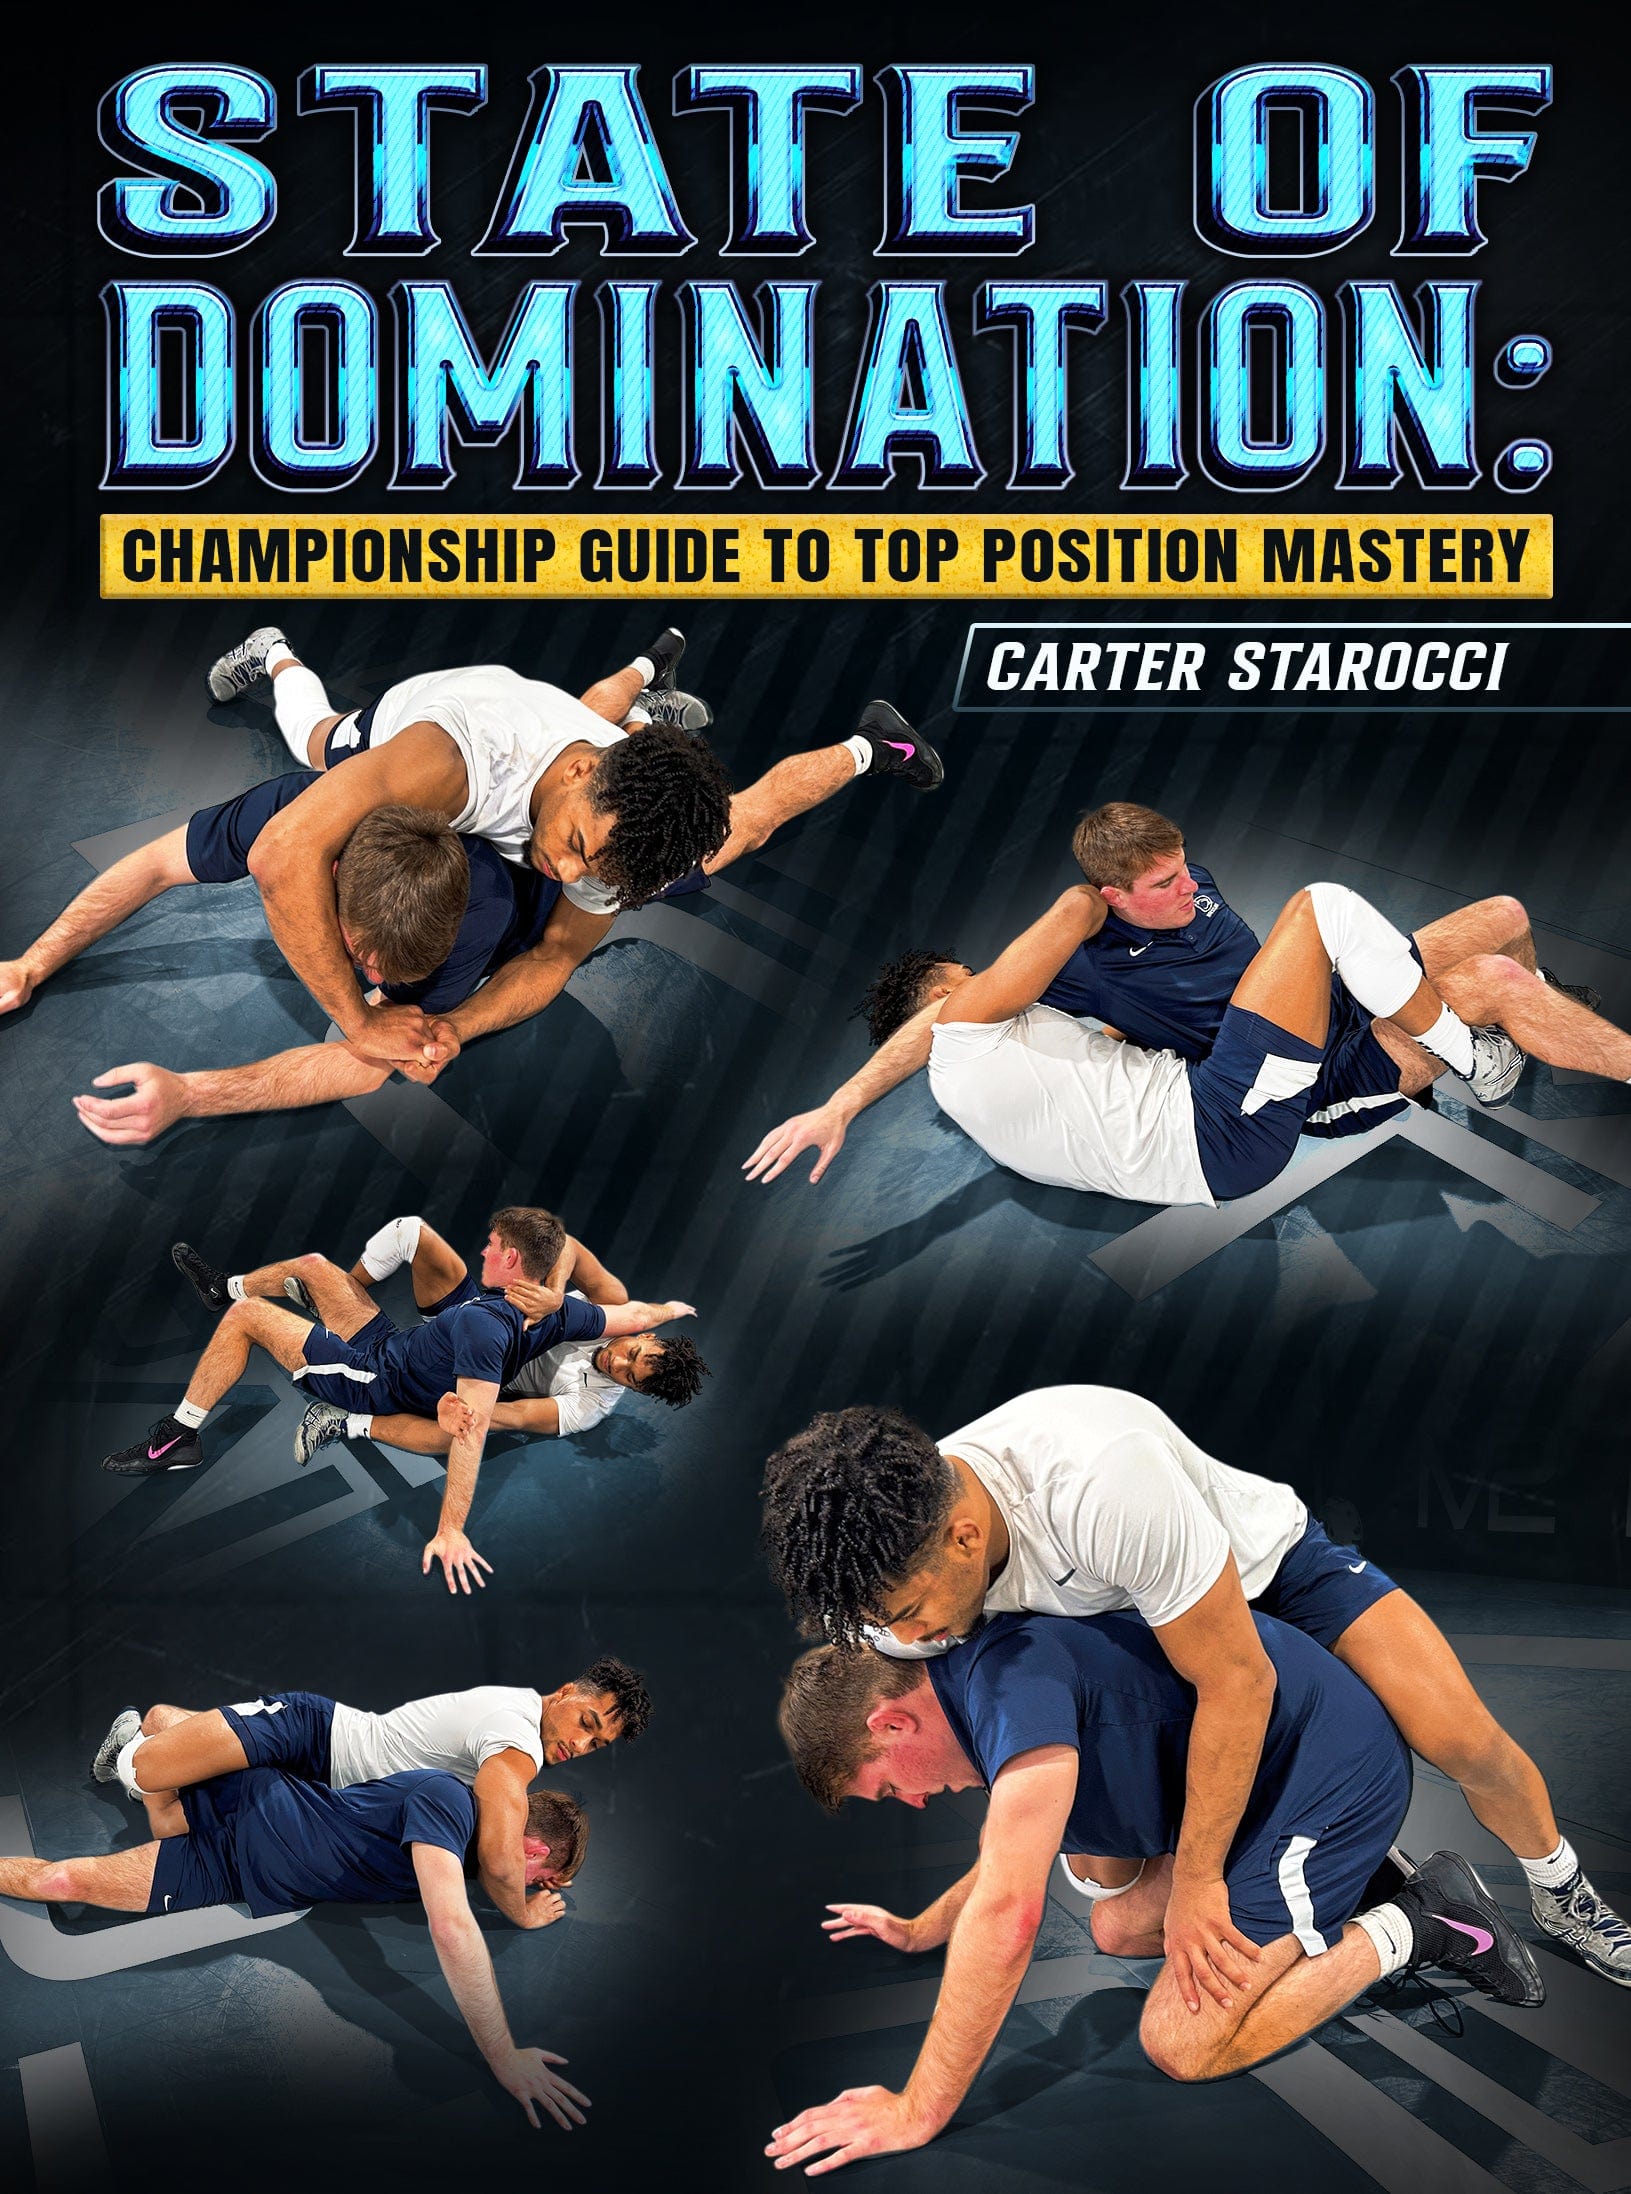 State of Domination: Championship Guide To Top Position Mastery by Carter Starocci - Fanatic Wrestling